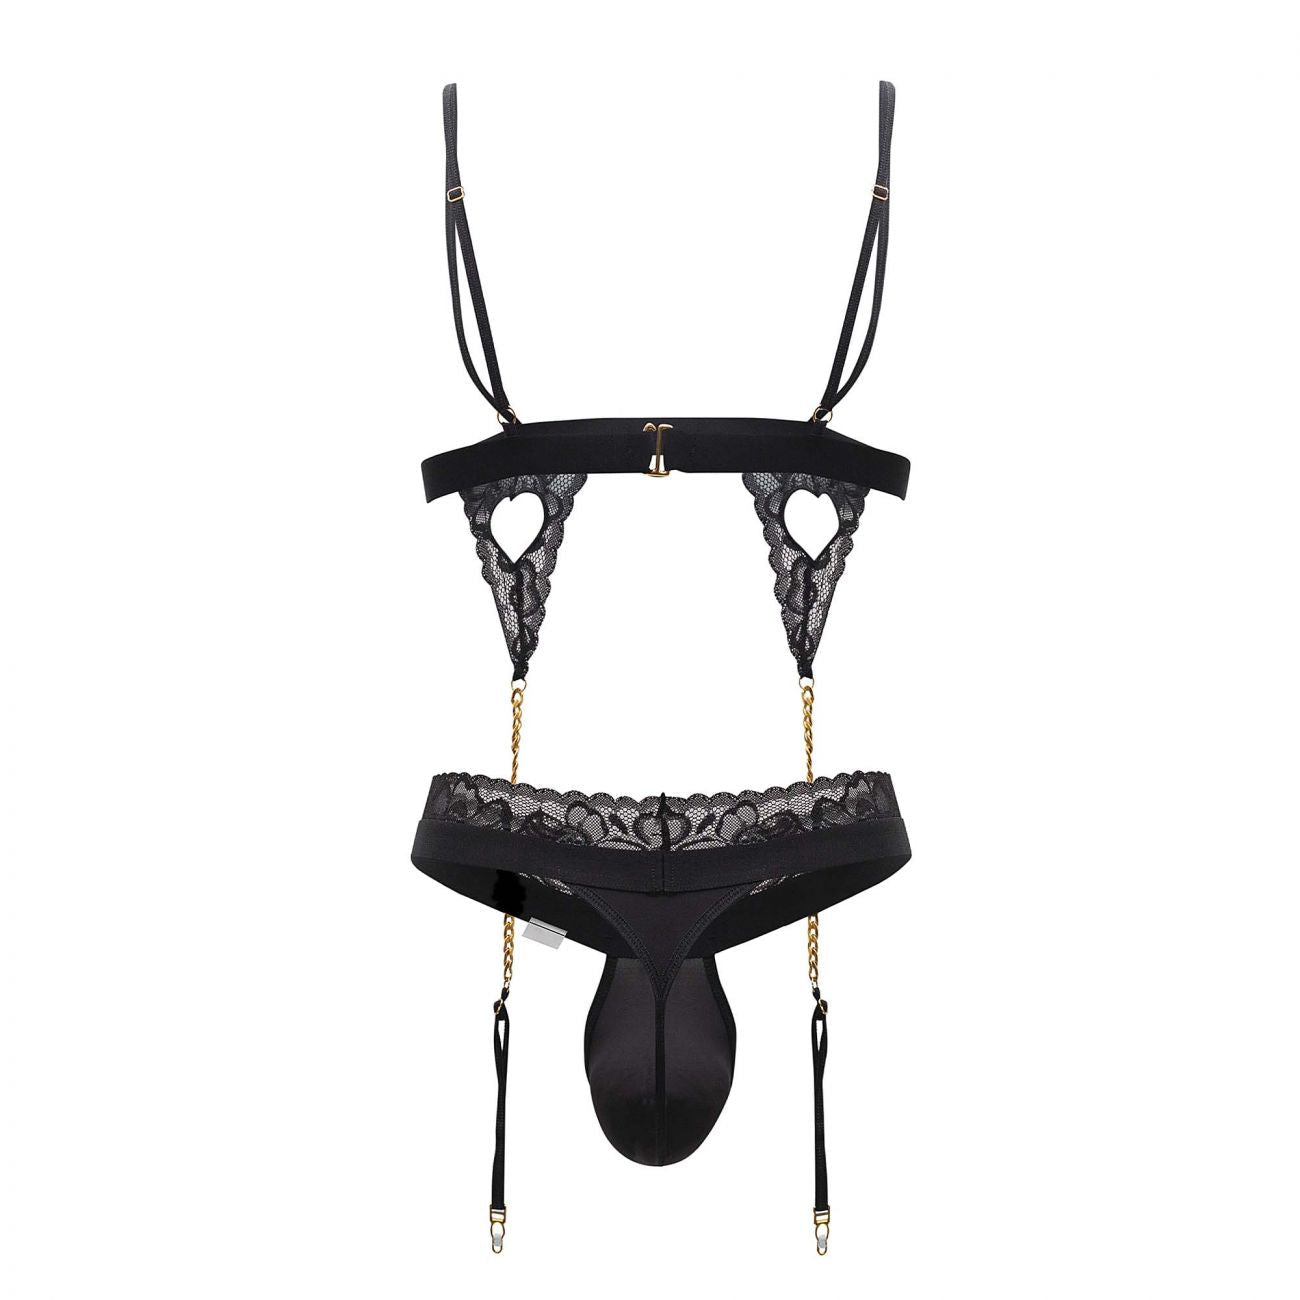 CandyMan 99581 Harness-Thongs Outfit Black